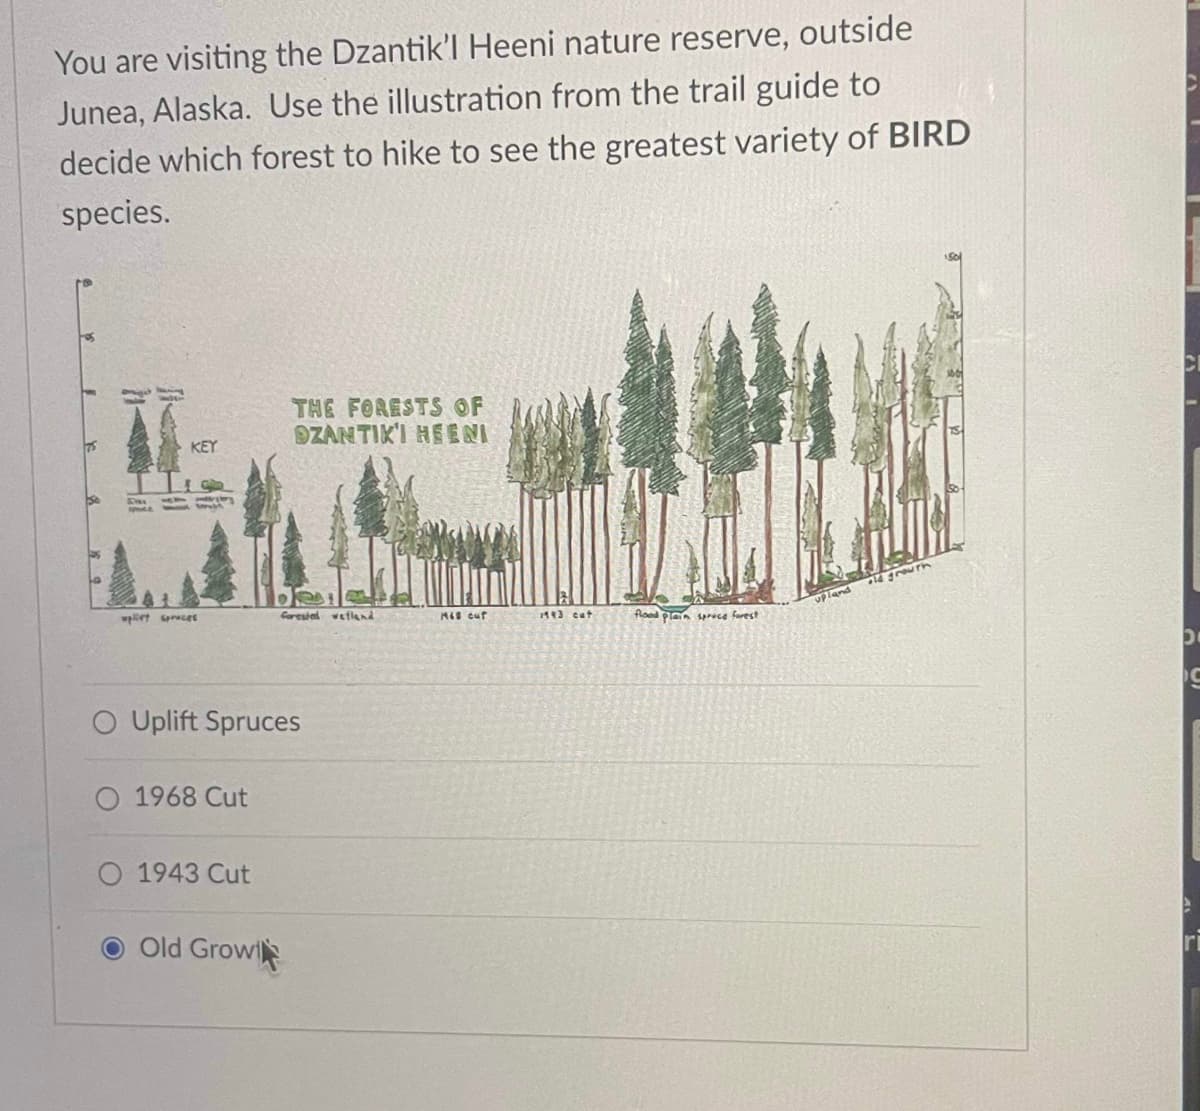 You are visiting the Dzantik'l Heeni nature reserve, outside
Junea, Alaska. Use the illustration from the trail guide to
decide which forest to hike to see the greatest variety of BIRD
species.
E
KEY
Impliet spruces
O 1968 Cut
O Uplift Spruces
O 1943 Cut
THE FORESTS OF
OZANTIK'I HEENI
Old Grow
Carested wetland
Mis cut
1143 cut
flood plan sprace forest
01
D
C
ri